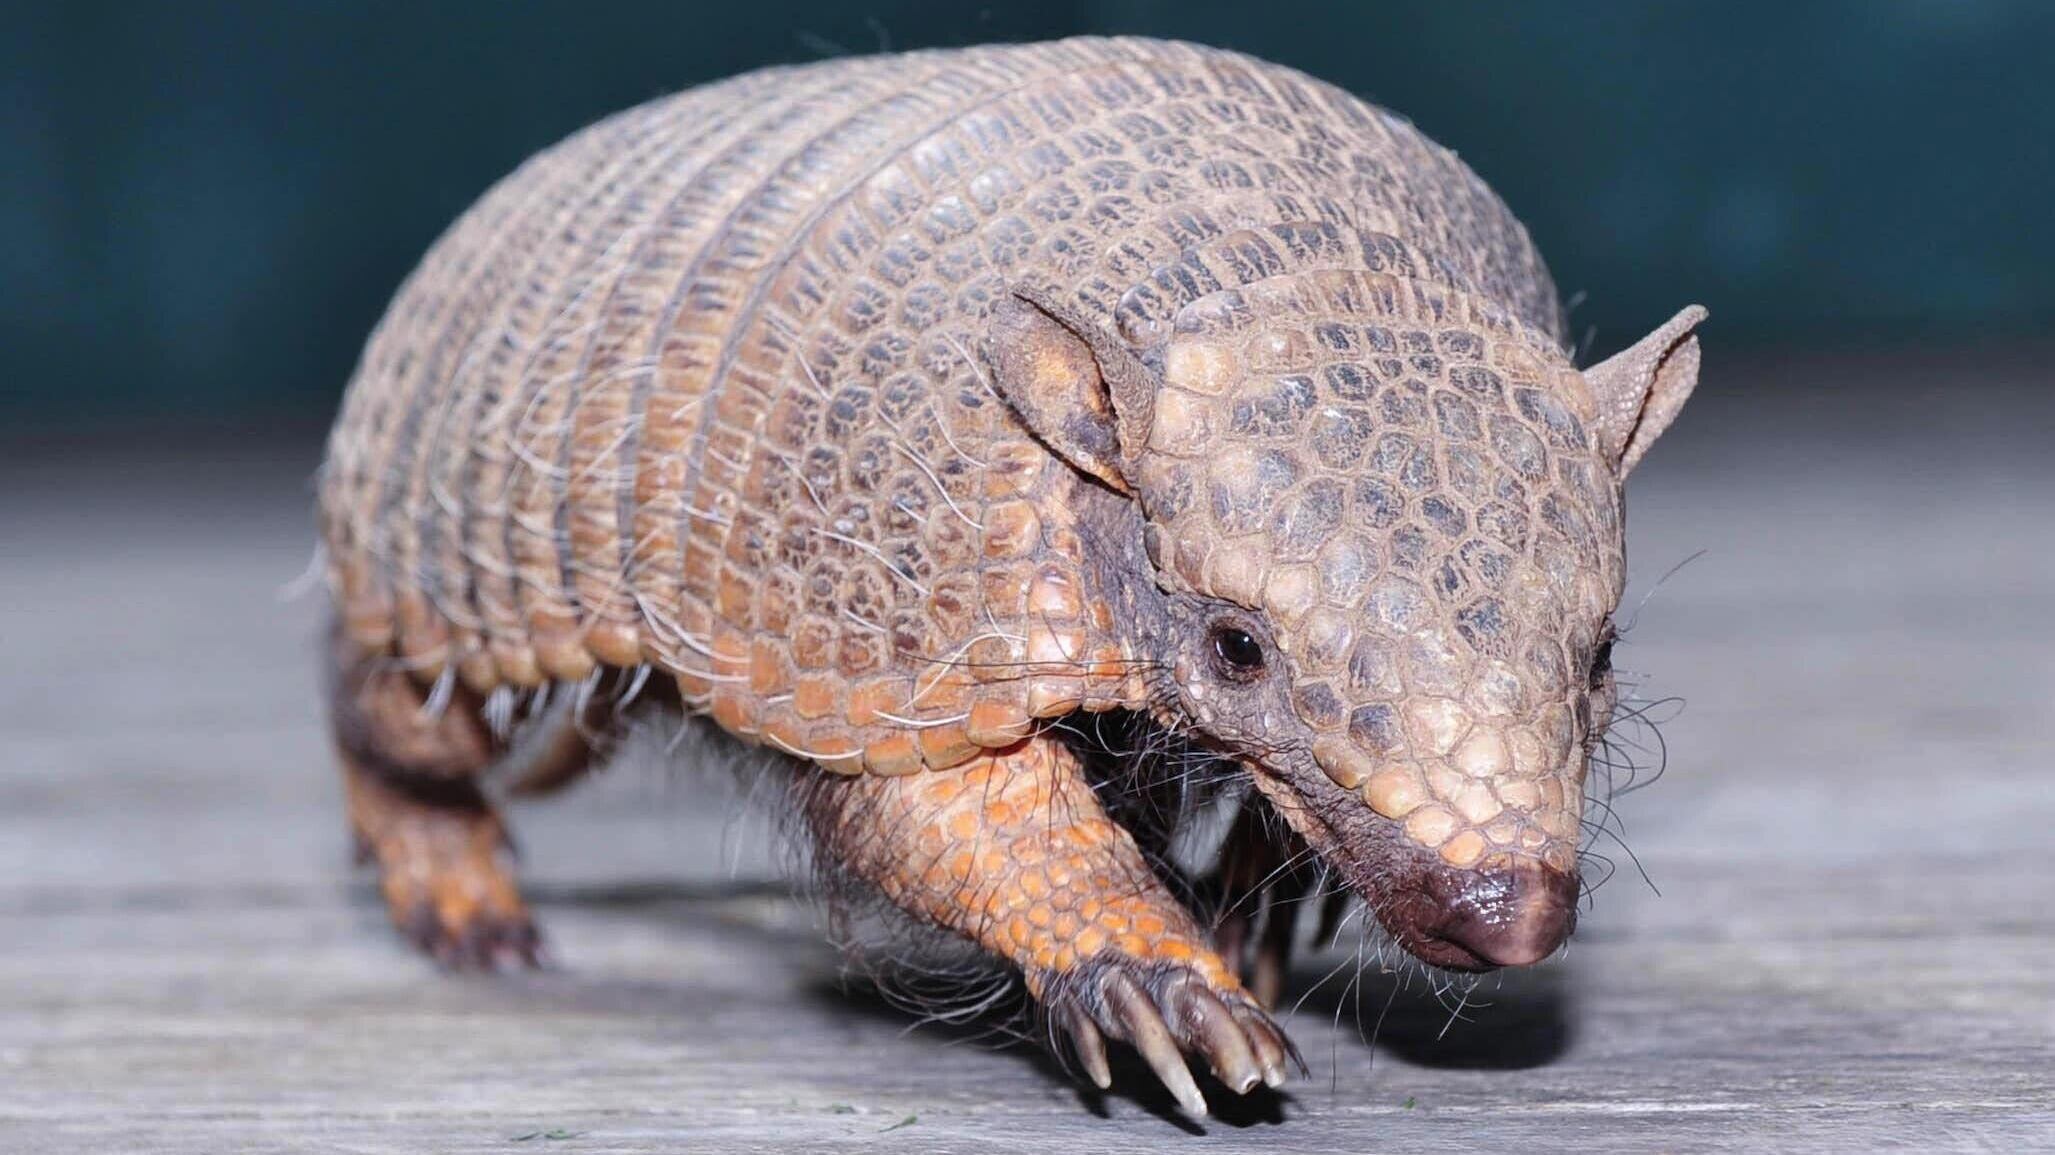 Parasites associated with the disease can reprogramme cells to increase the size of a liver in armadillos, researchers found.